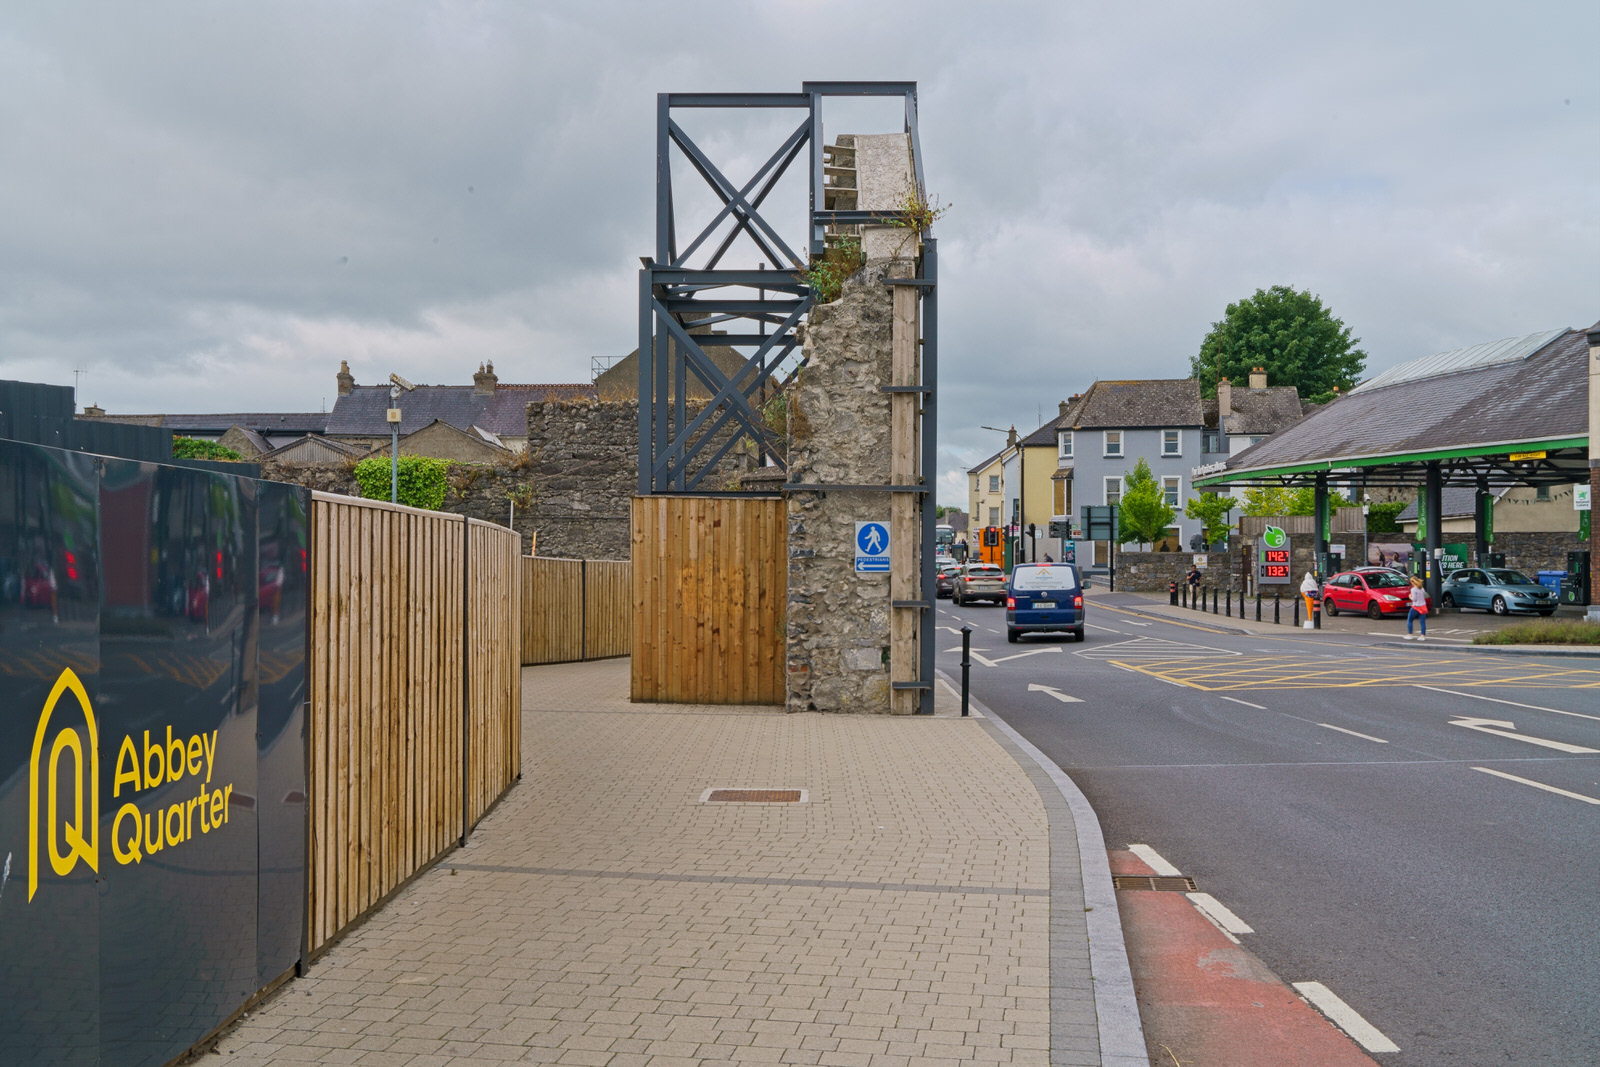 THE NEW ST FRANCIS BRIDGE IN KILKENNY AND THE SURROUNDING AREA [OPENED TO THE PUBLIC IN 2017]-227067-1